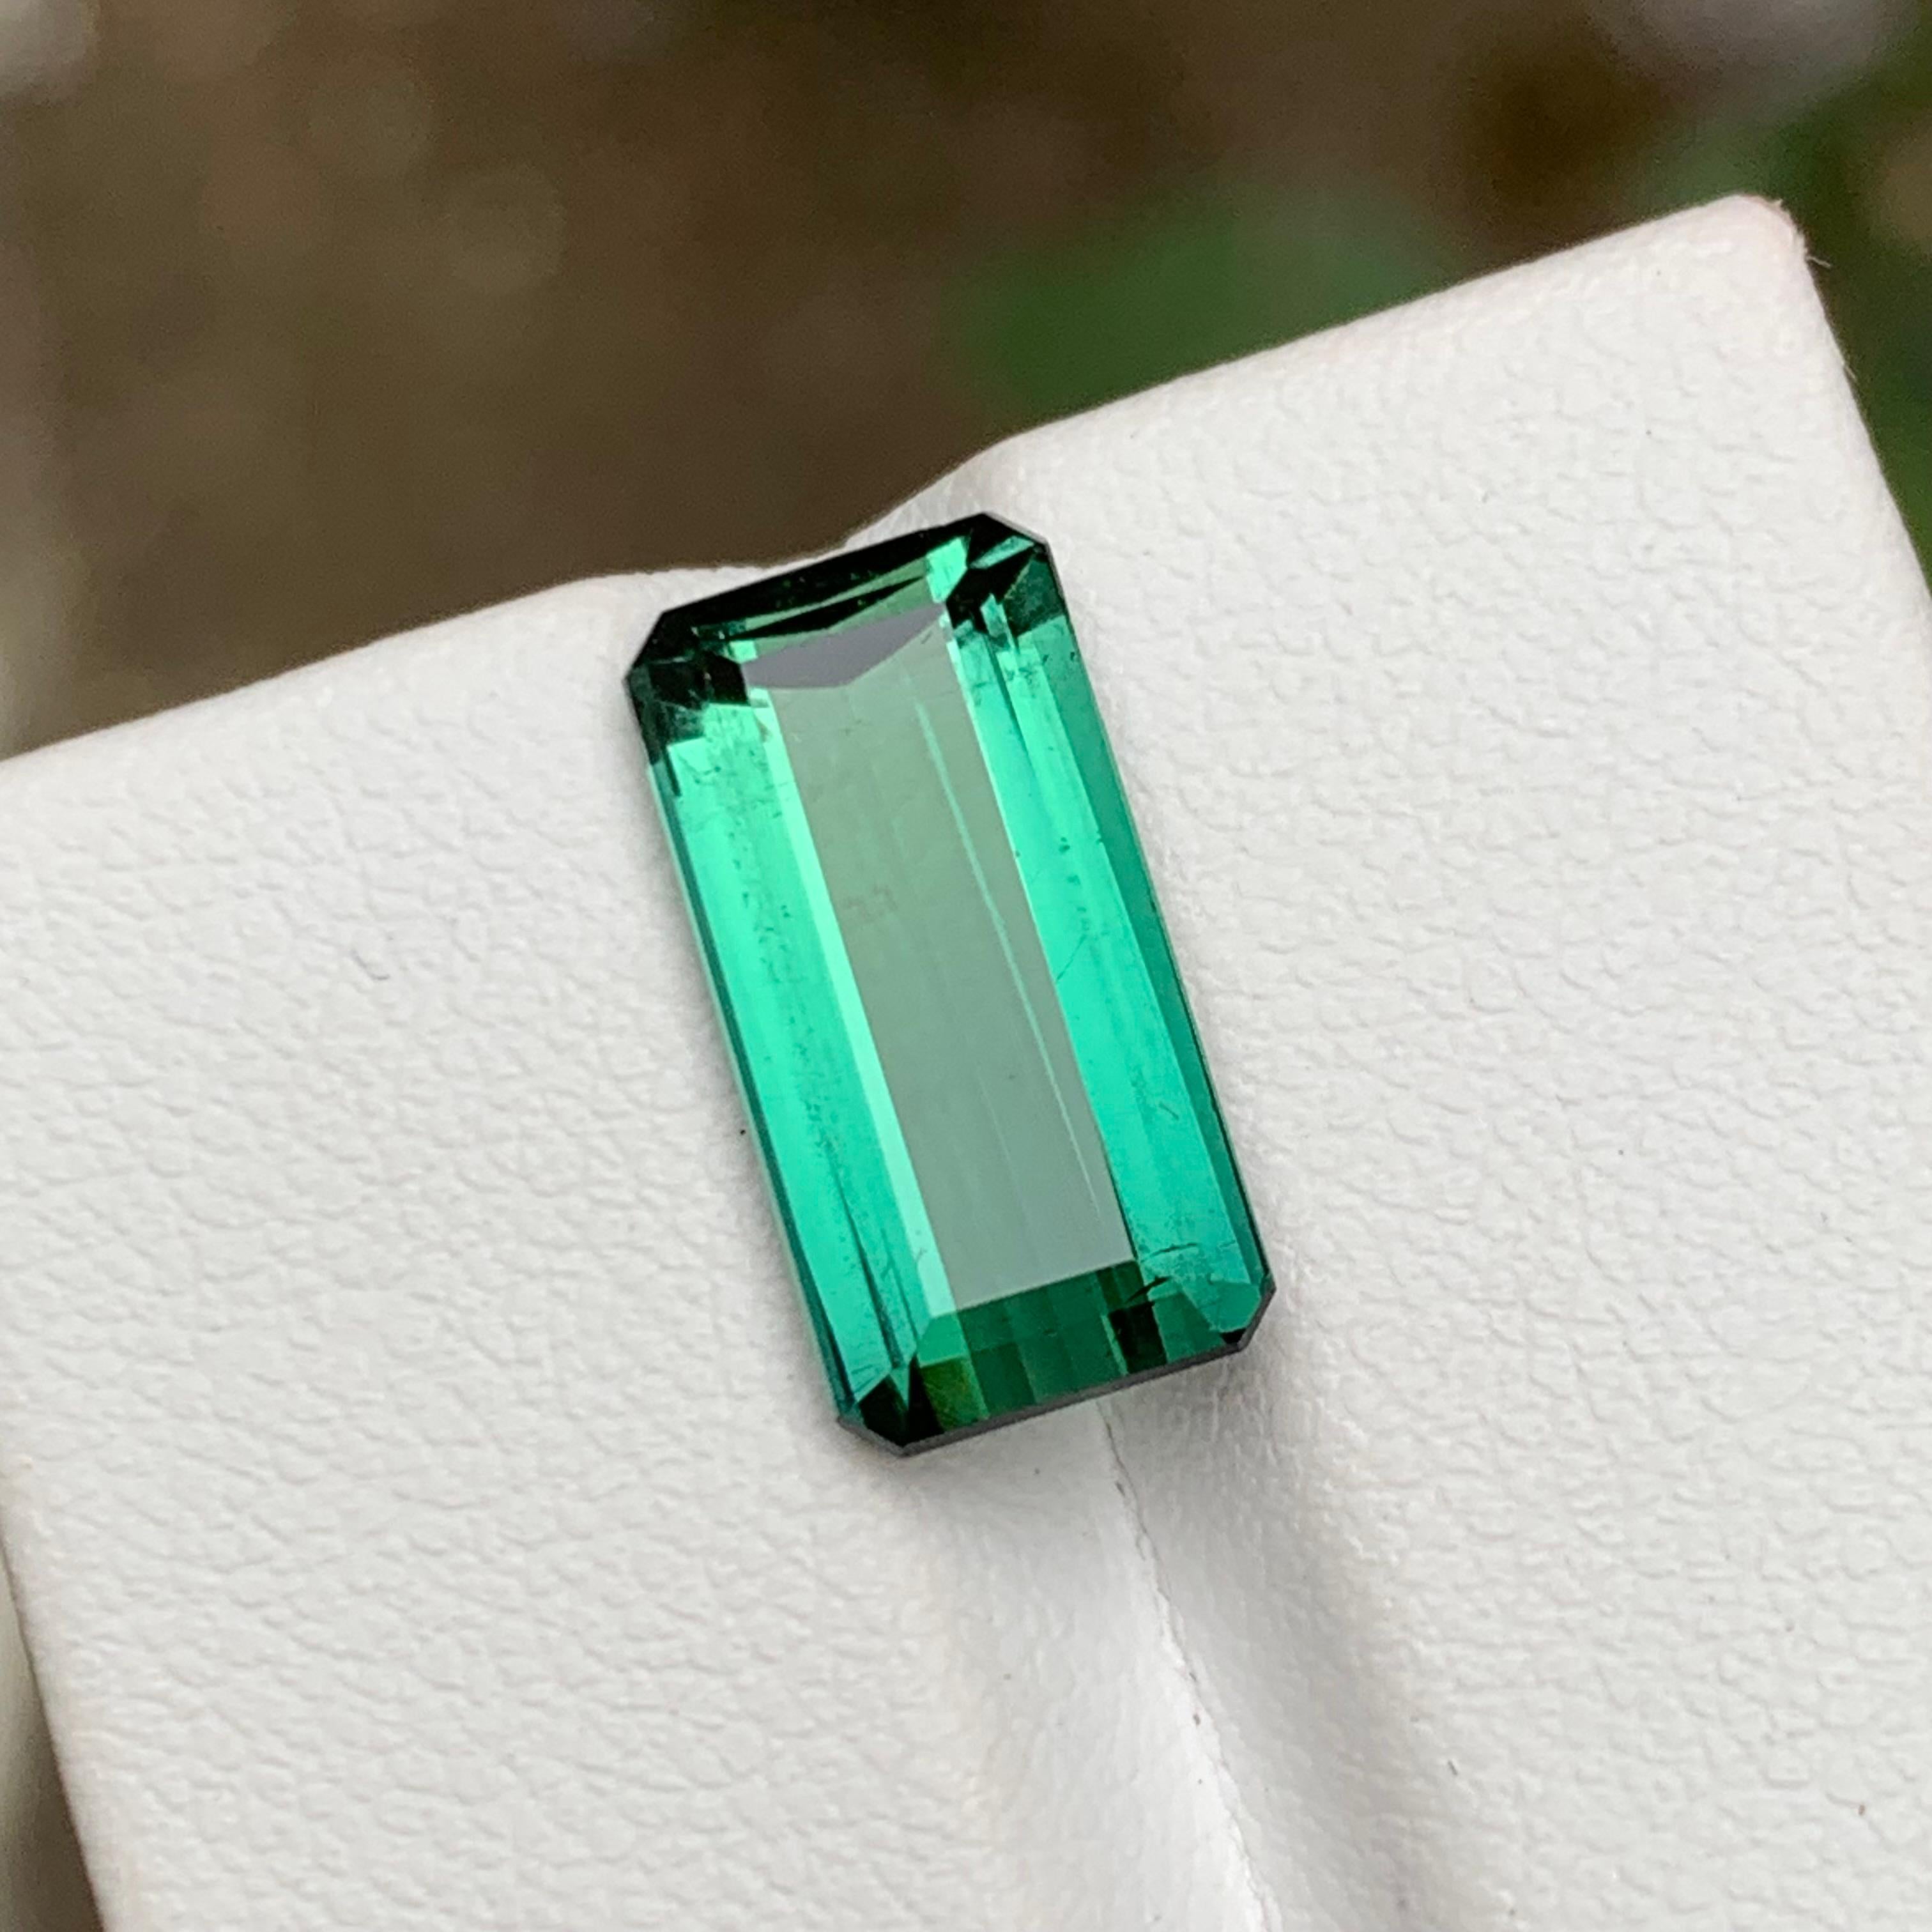 GEMSTONE TYPE: Tourmaline
PIECE(S): 1
WEIGHT: 6.25 Carats
SHAPE: Emerald Cut
SIZE (MM): 14.90 x 7.62 x 5.69
COLOR: Bluish Neon Green
CLARITY: Approx 95% Eye Clean
TREATMENT: None
ORIGIN: Afghanistan
CERTIFICATE: On demand
(if you require a